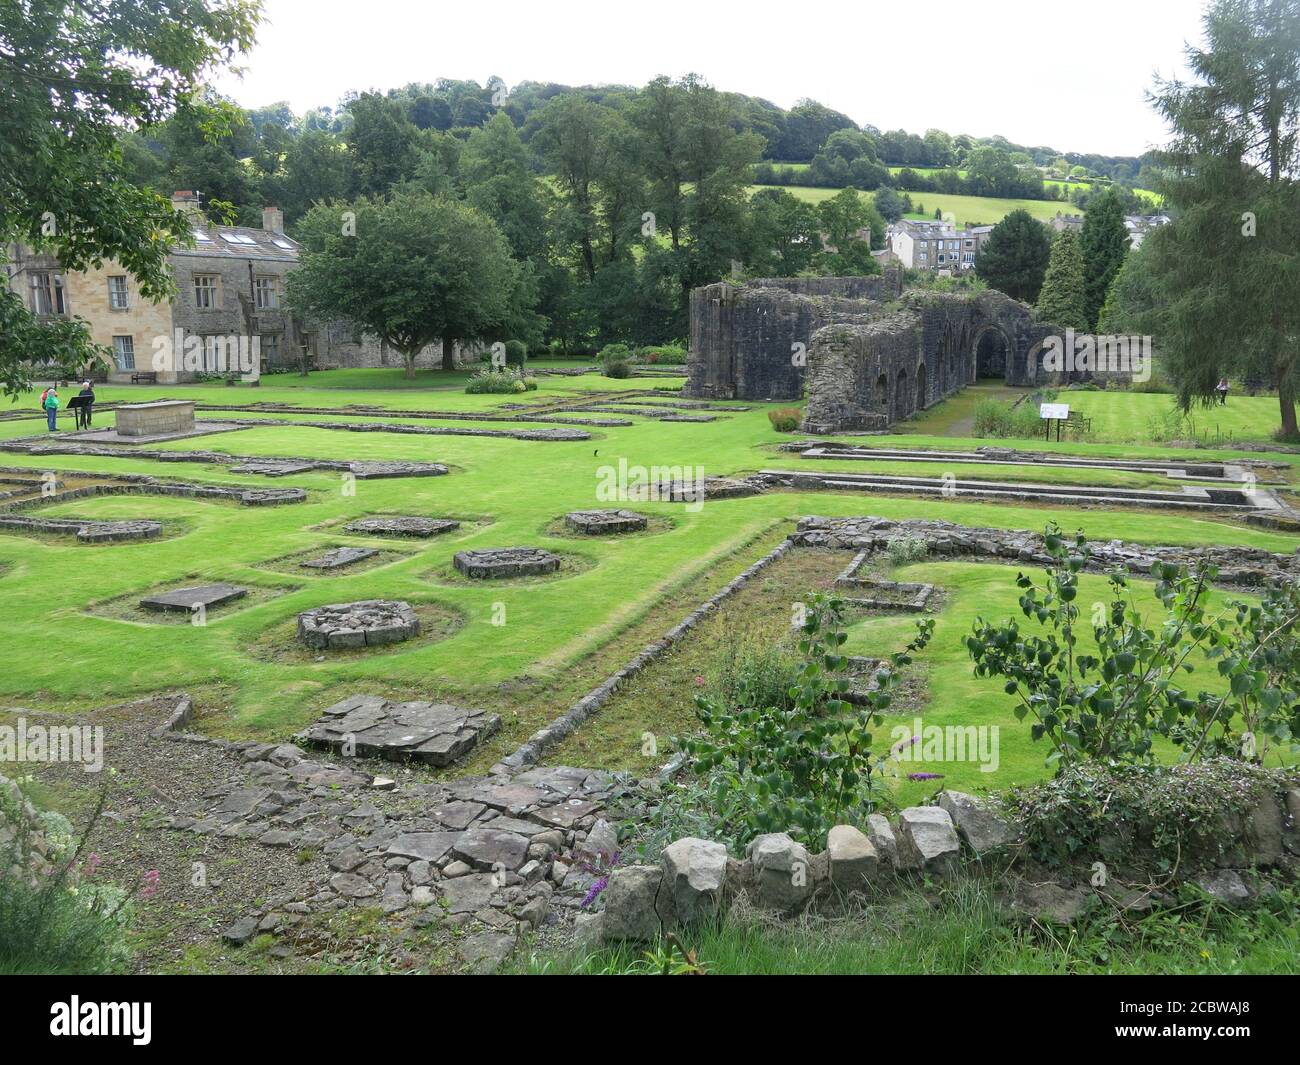 View of the grounds with the foundations and footprint of the former 14th century monastery at Whalley Abbey, Lancashire. Stock Photo